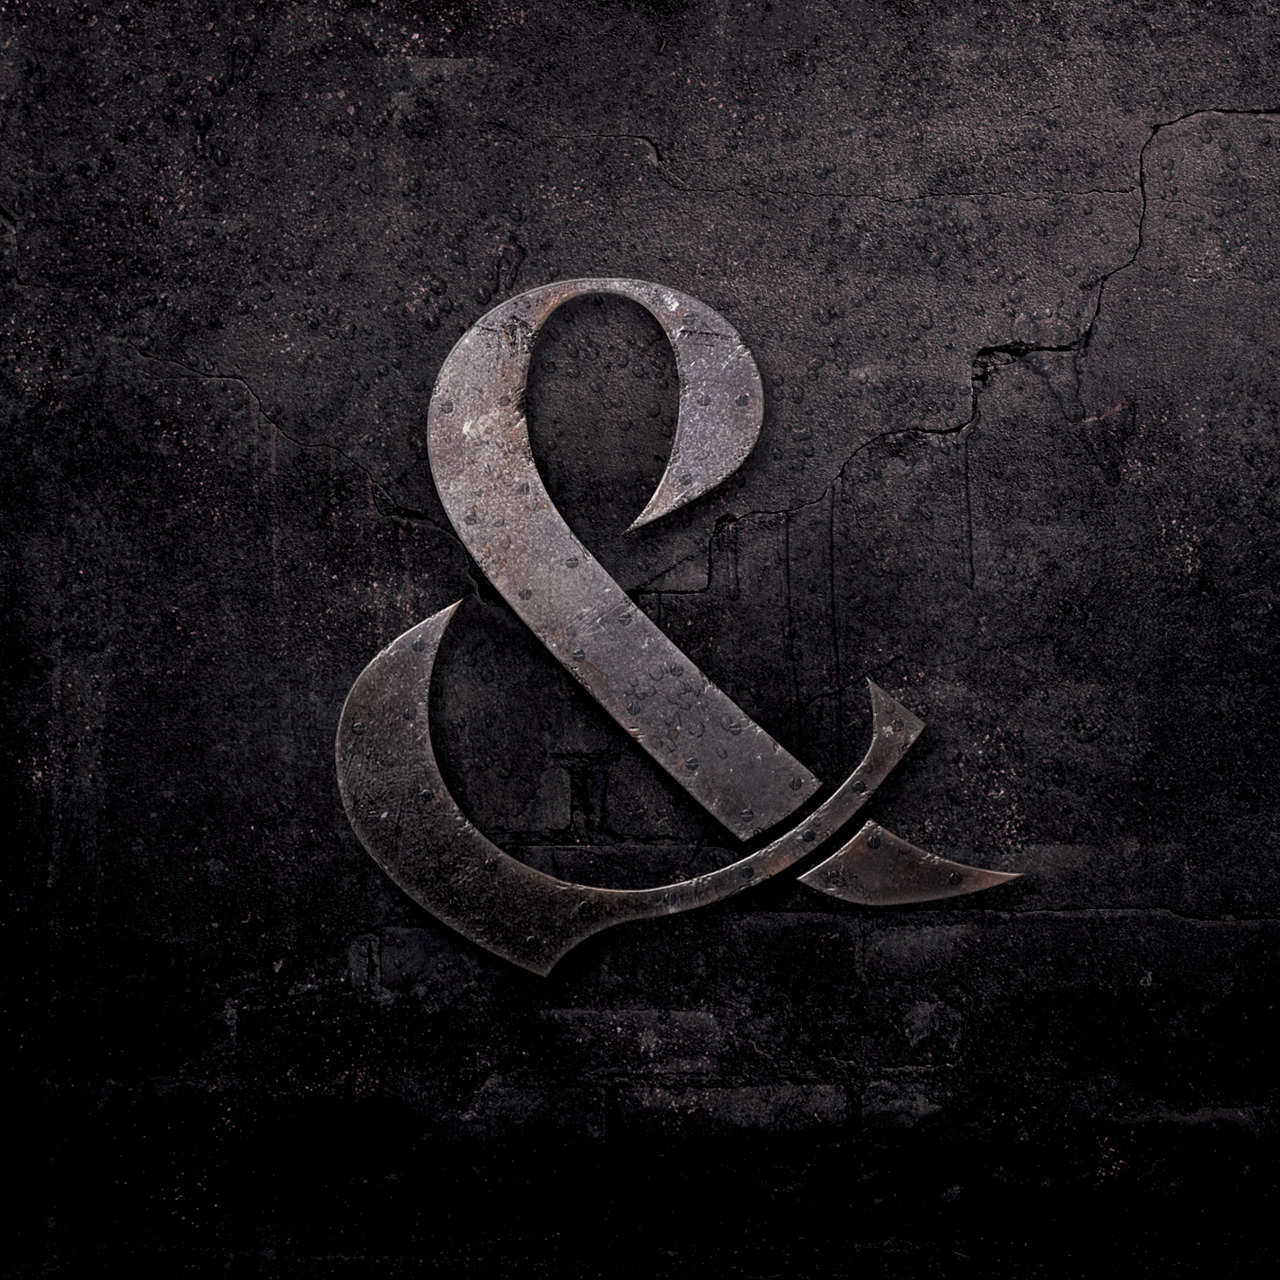 News Added Jun 13, 2012 The new version or deluxe edition of the second album by Of Mice & Men set to release in July 24th and tracklist and cover art are confirmed by OM&M member's network accounts, via Rise Records. Submitted By Pierre Diaz Track list: Added Jun 13, 2012 1. OG. Loko 2. […]